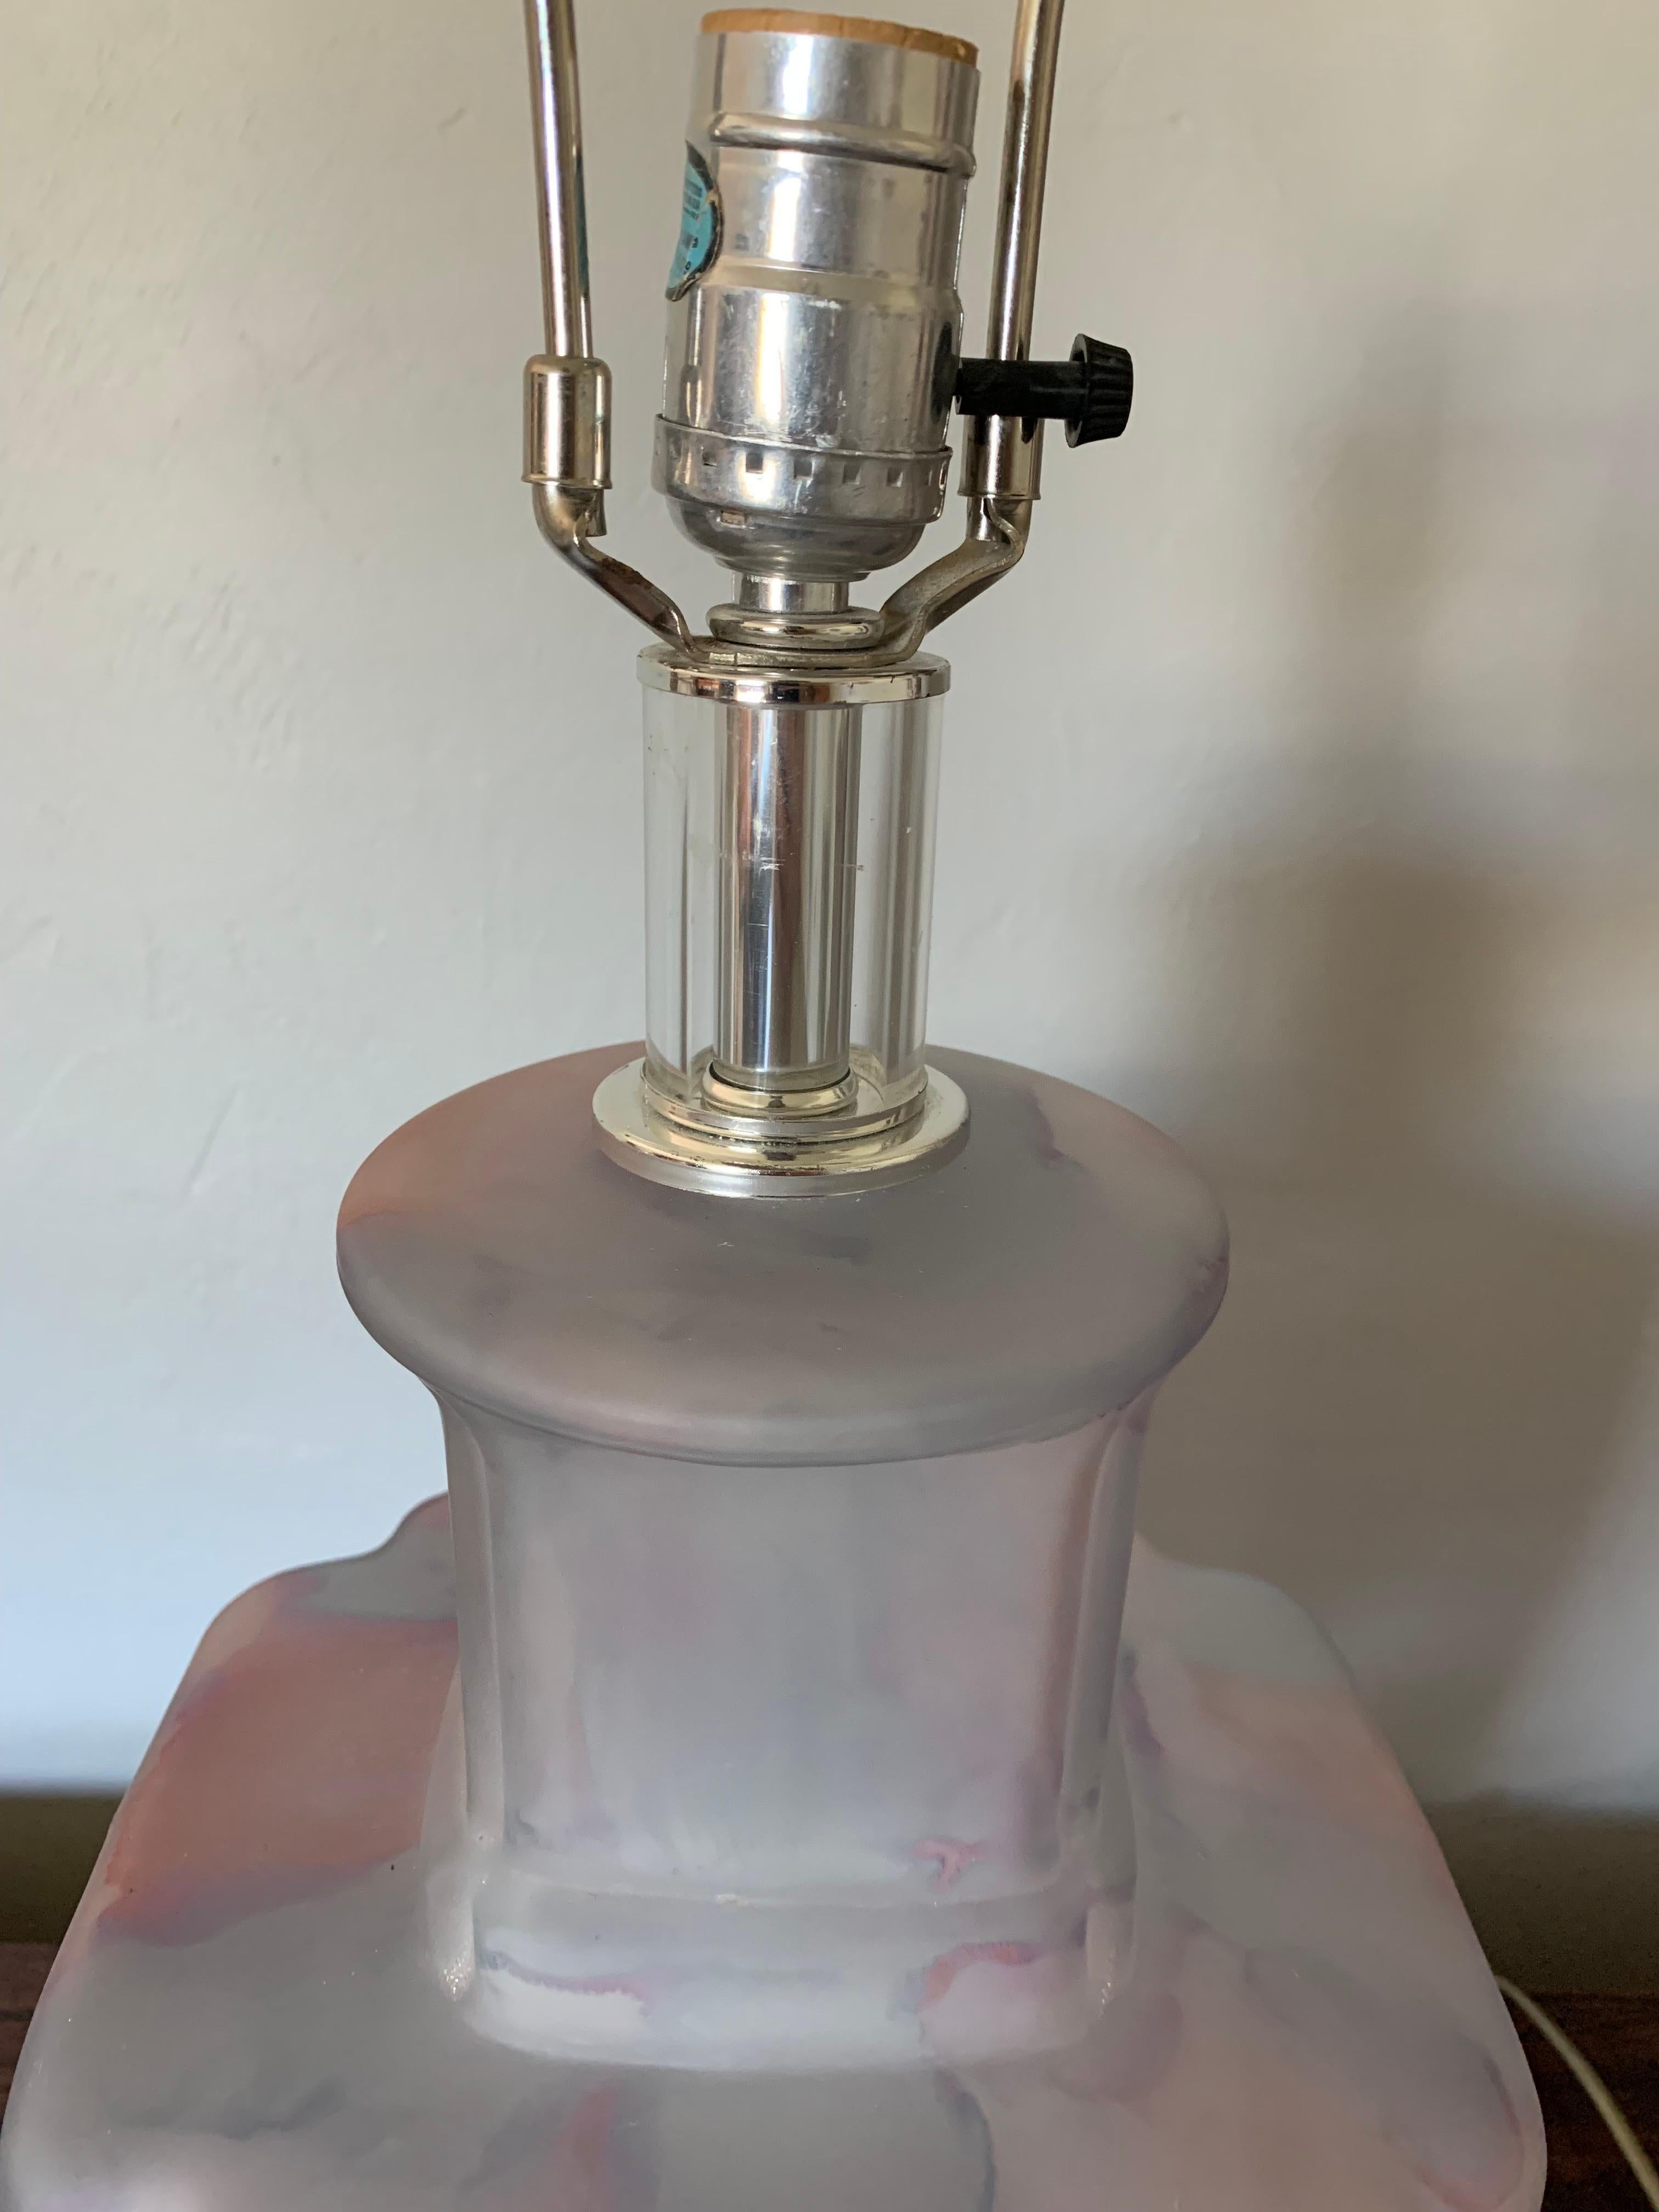 Fantastic pair of Mid century modern Bauer table lamps. Beautifully made from swirling glass with pinks, whites, blues and clear glass. Lucite base and finial with chrome accents.

Has a light in the glass as well for a second source of light.